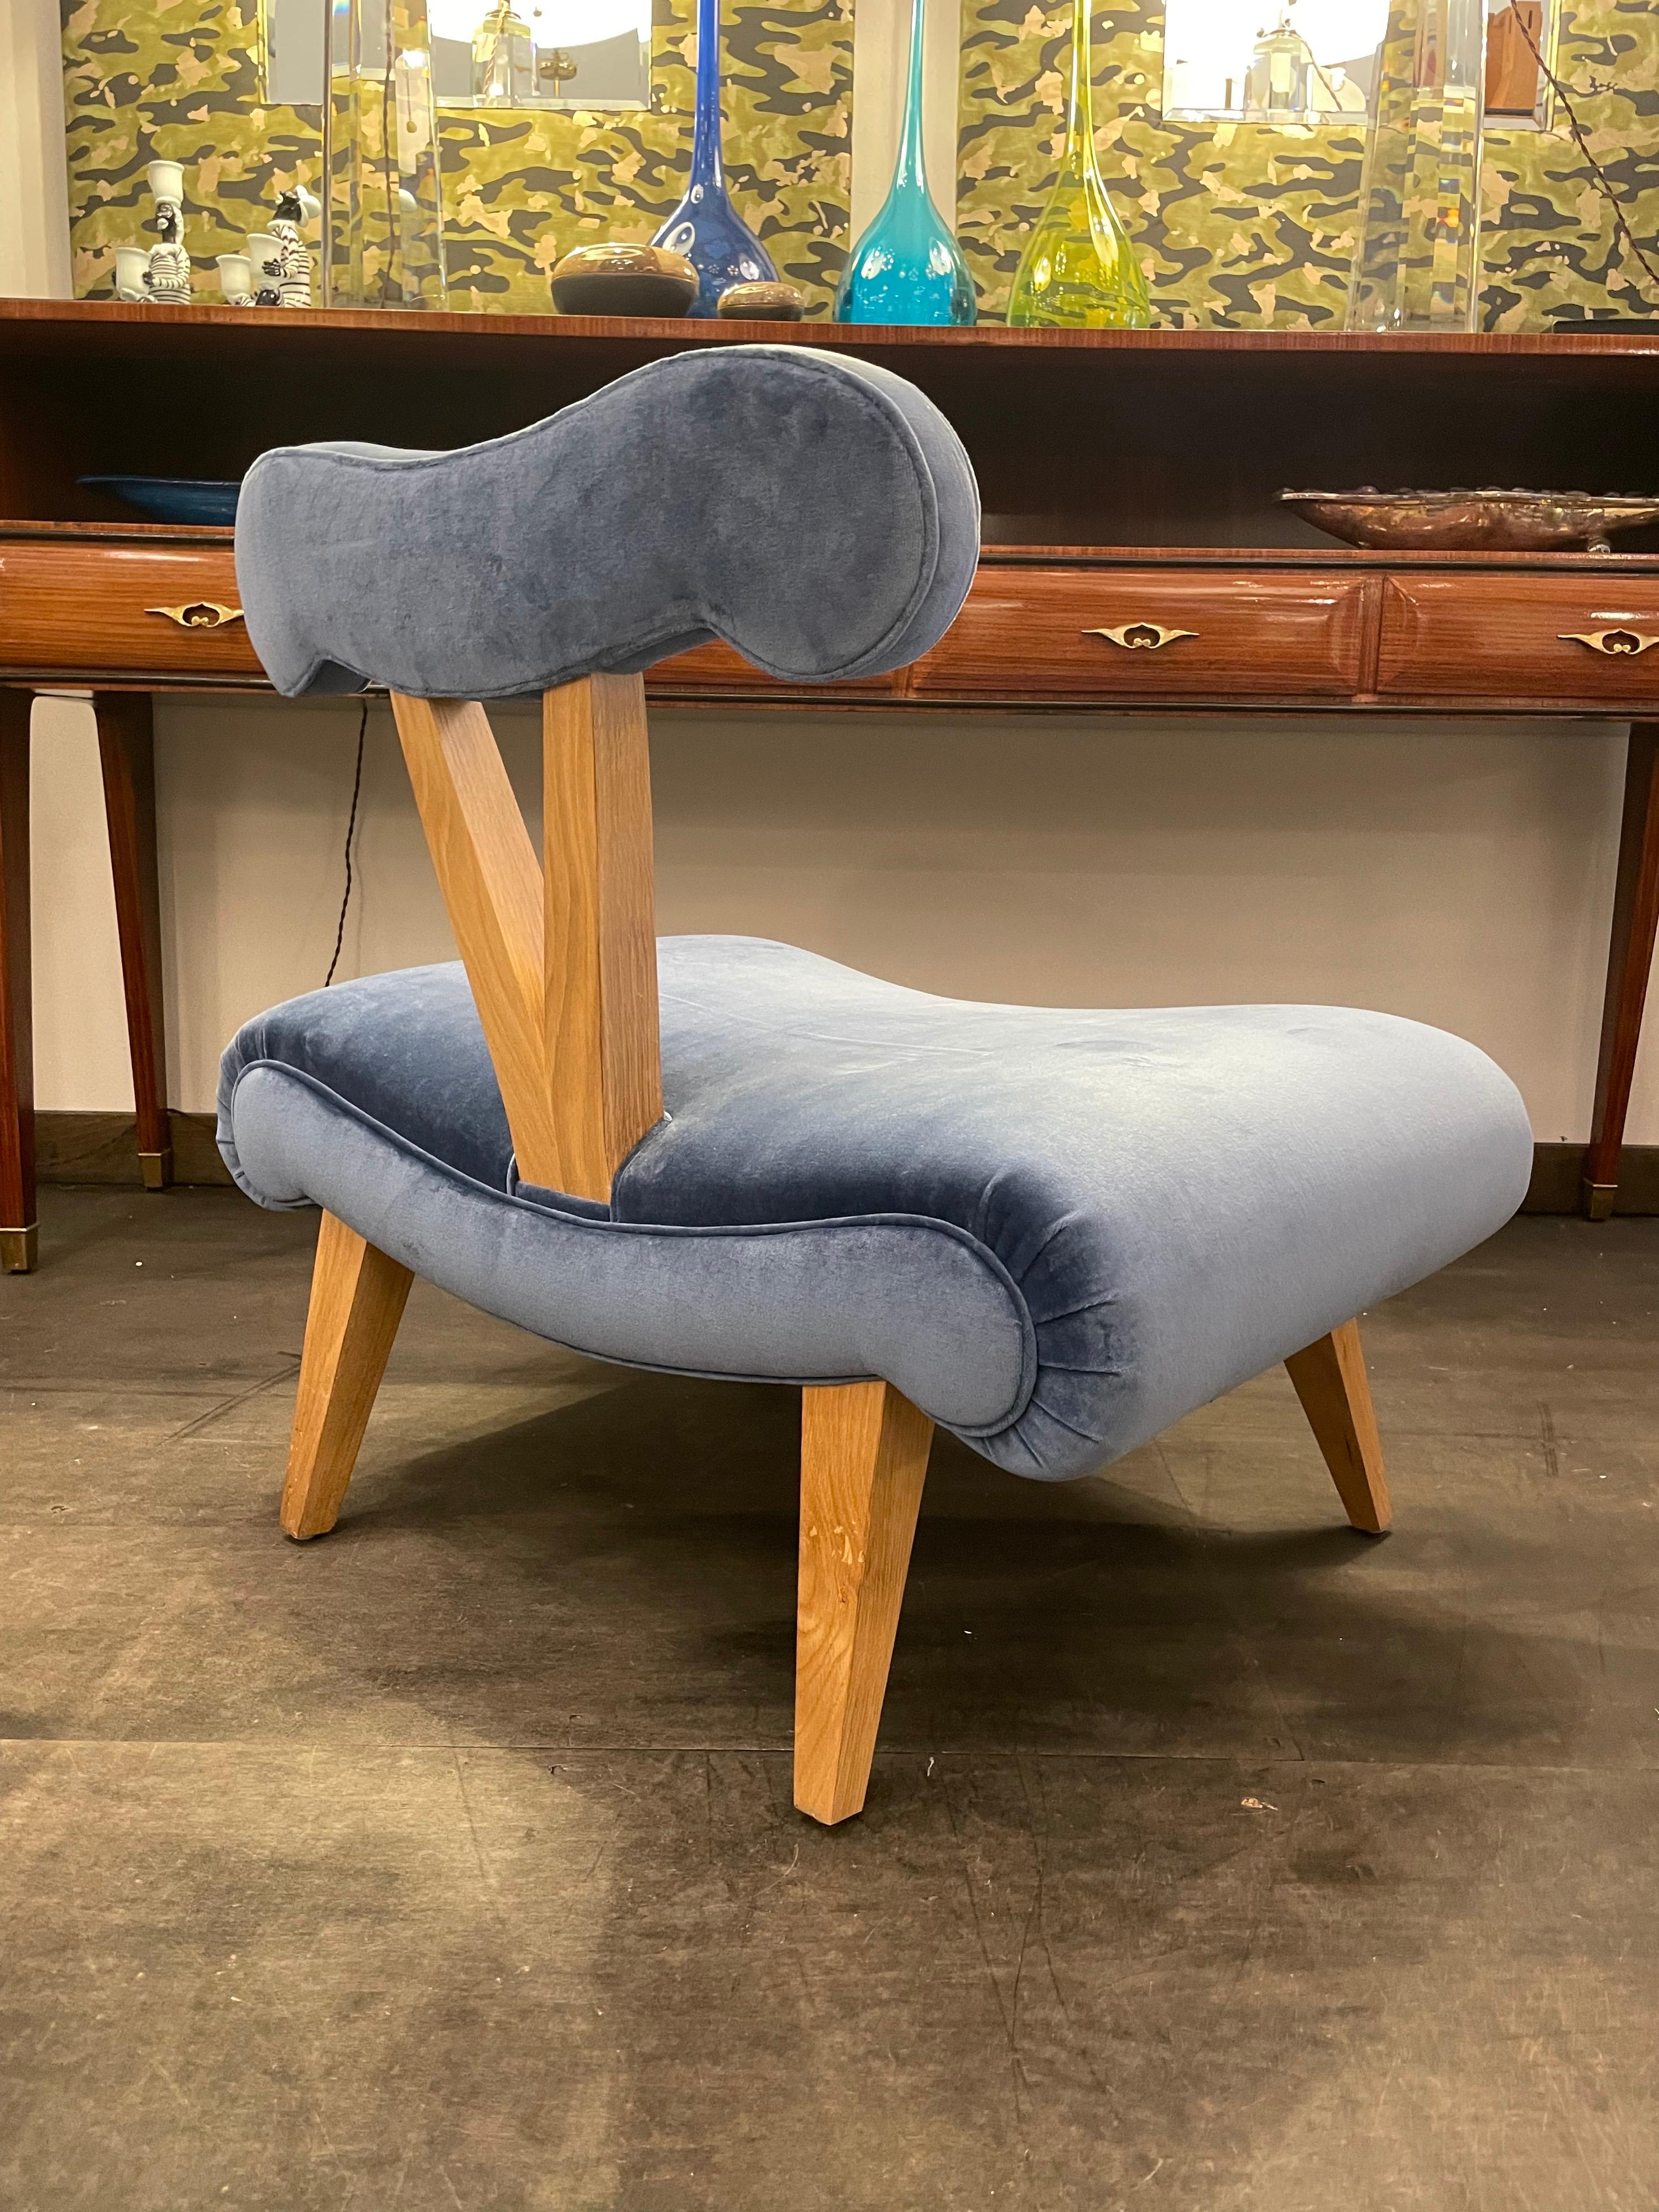 We have 4 of thee iconic Grosfeld House slipper chairs in the Hollywood Regency style, made later than the 1940's. In pristine, almost never used condition, in 4 different velvet colors, making a whimsical grouping. Priced and sold individually -